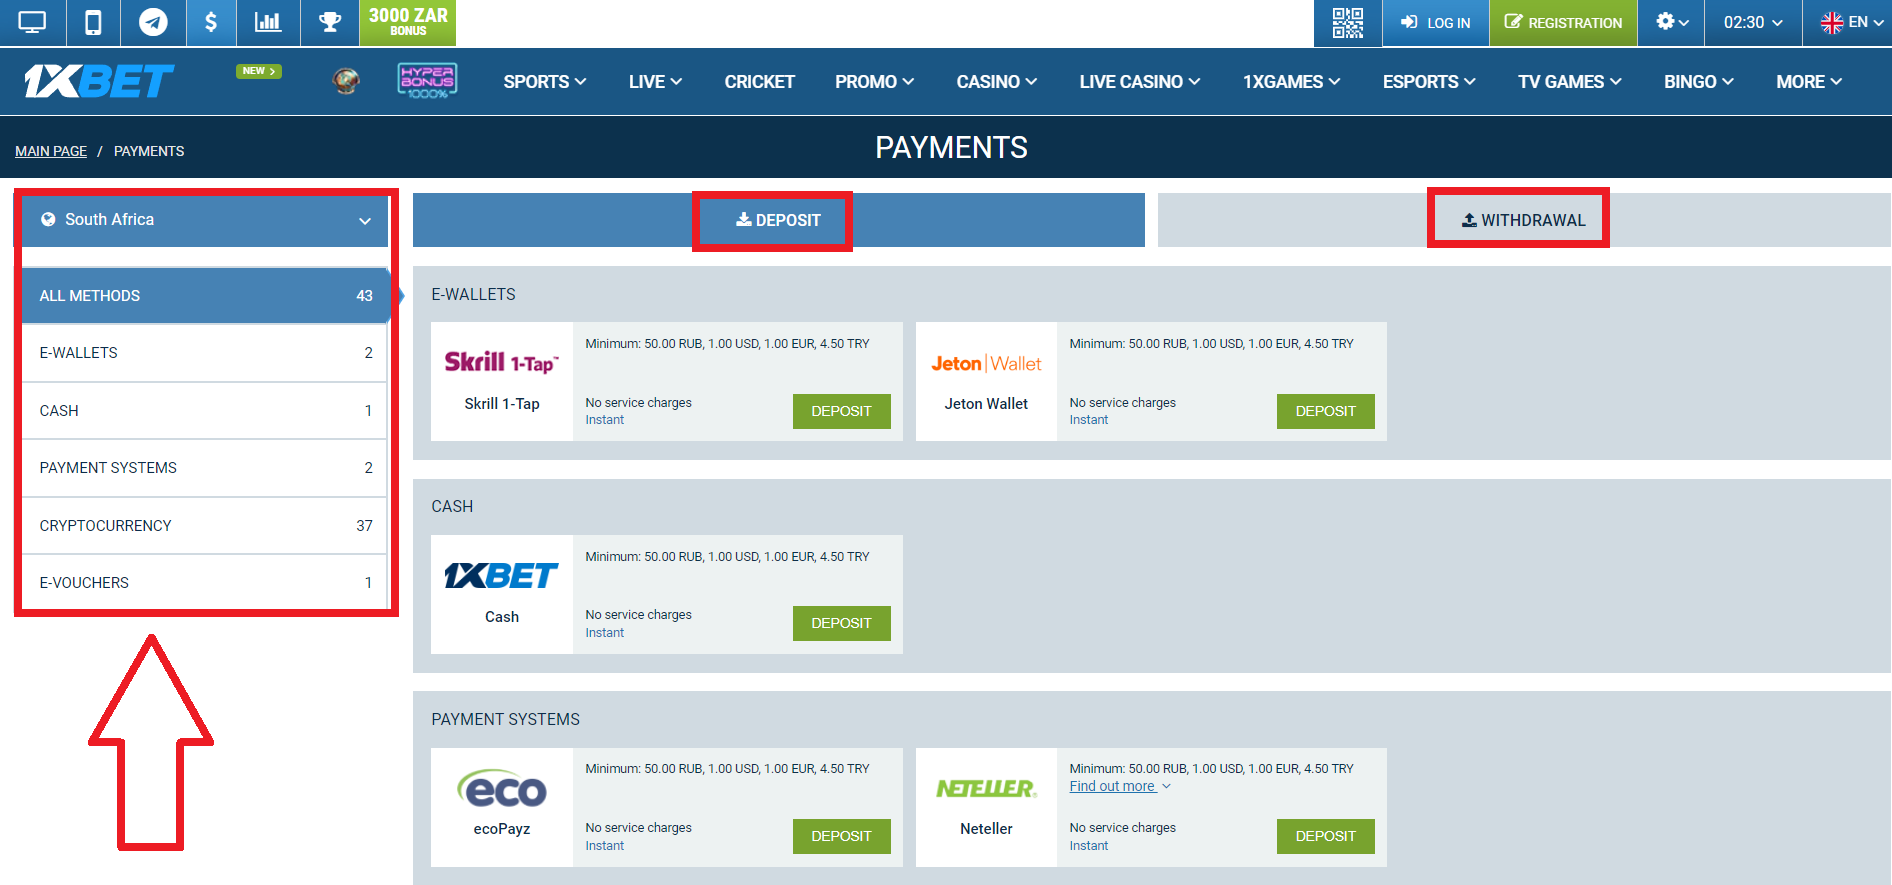 1xBet Payment Methods in South Africa